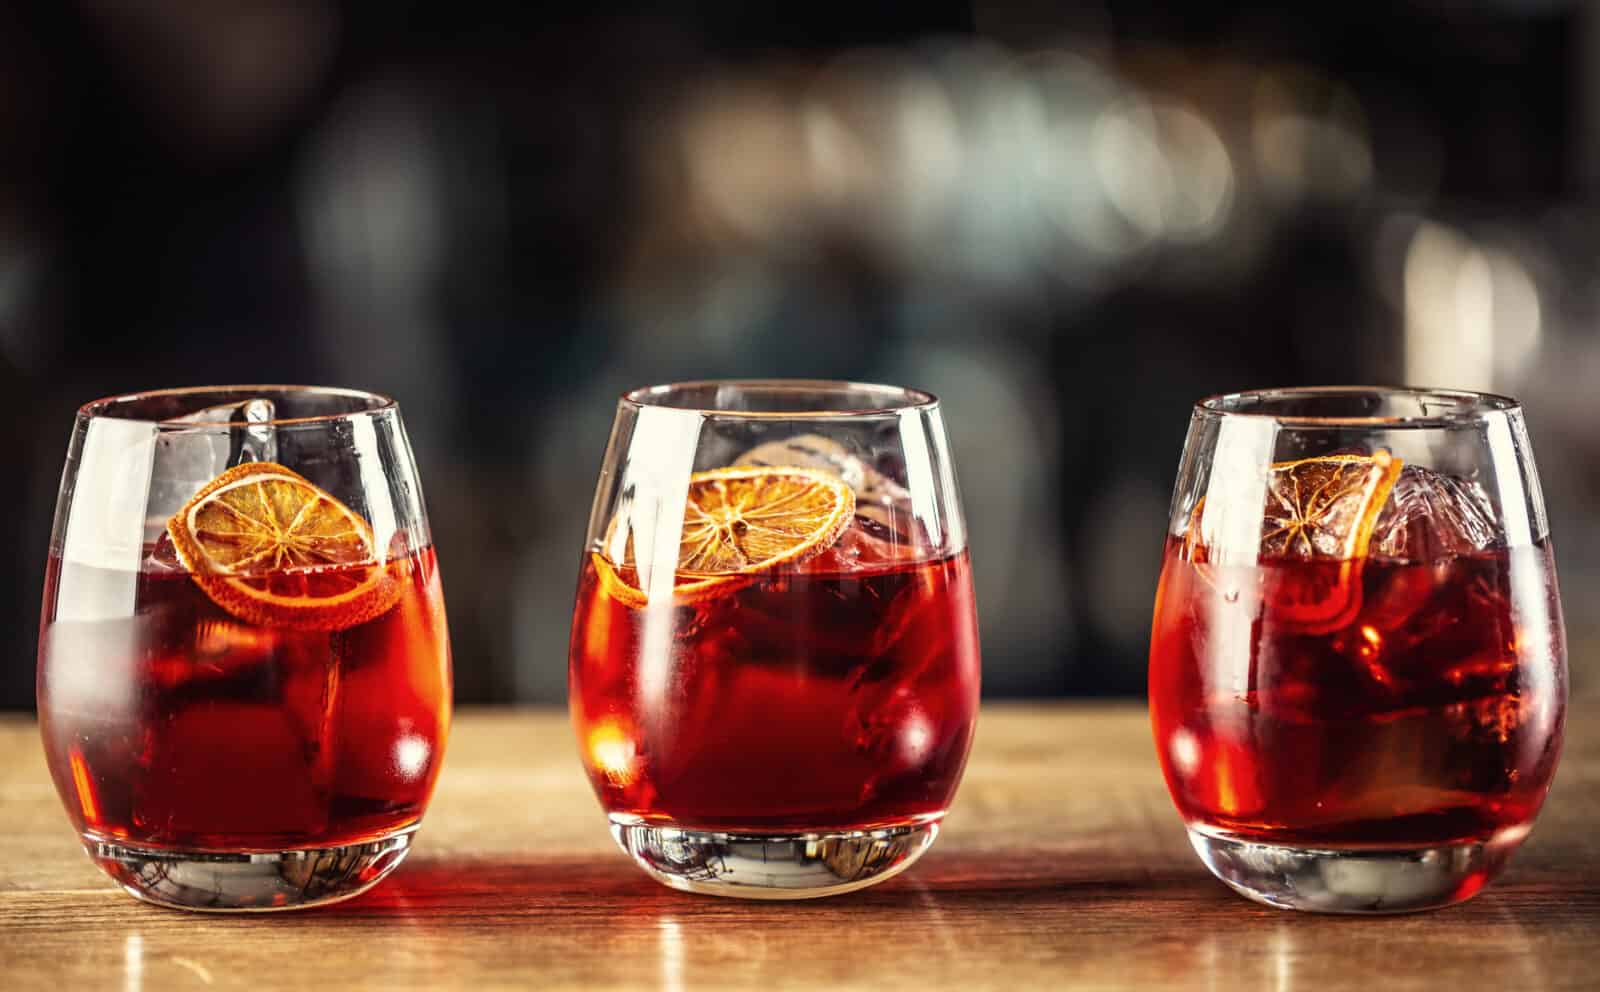 bourbon, Campari, and sweet vermouth drink garnished with an orange slice